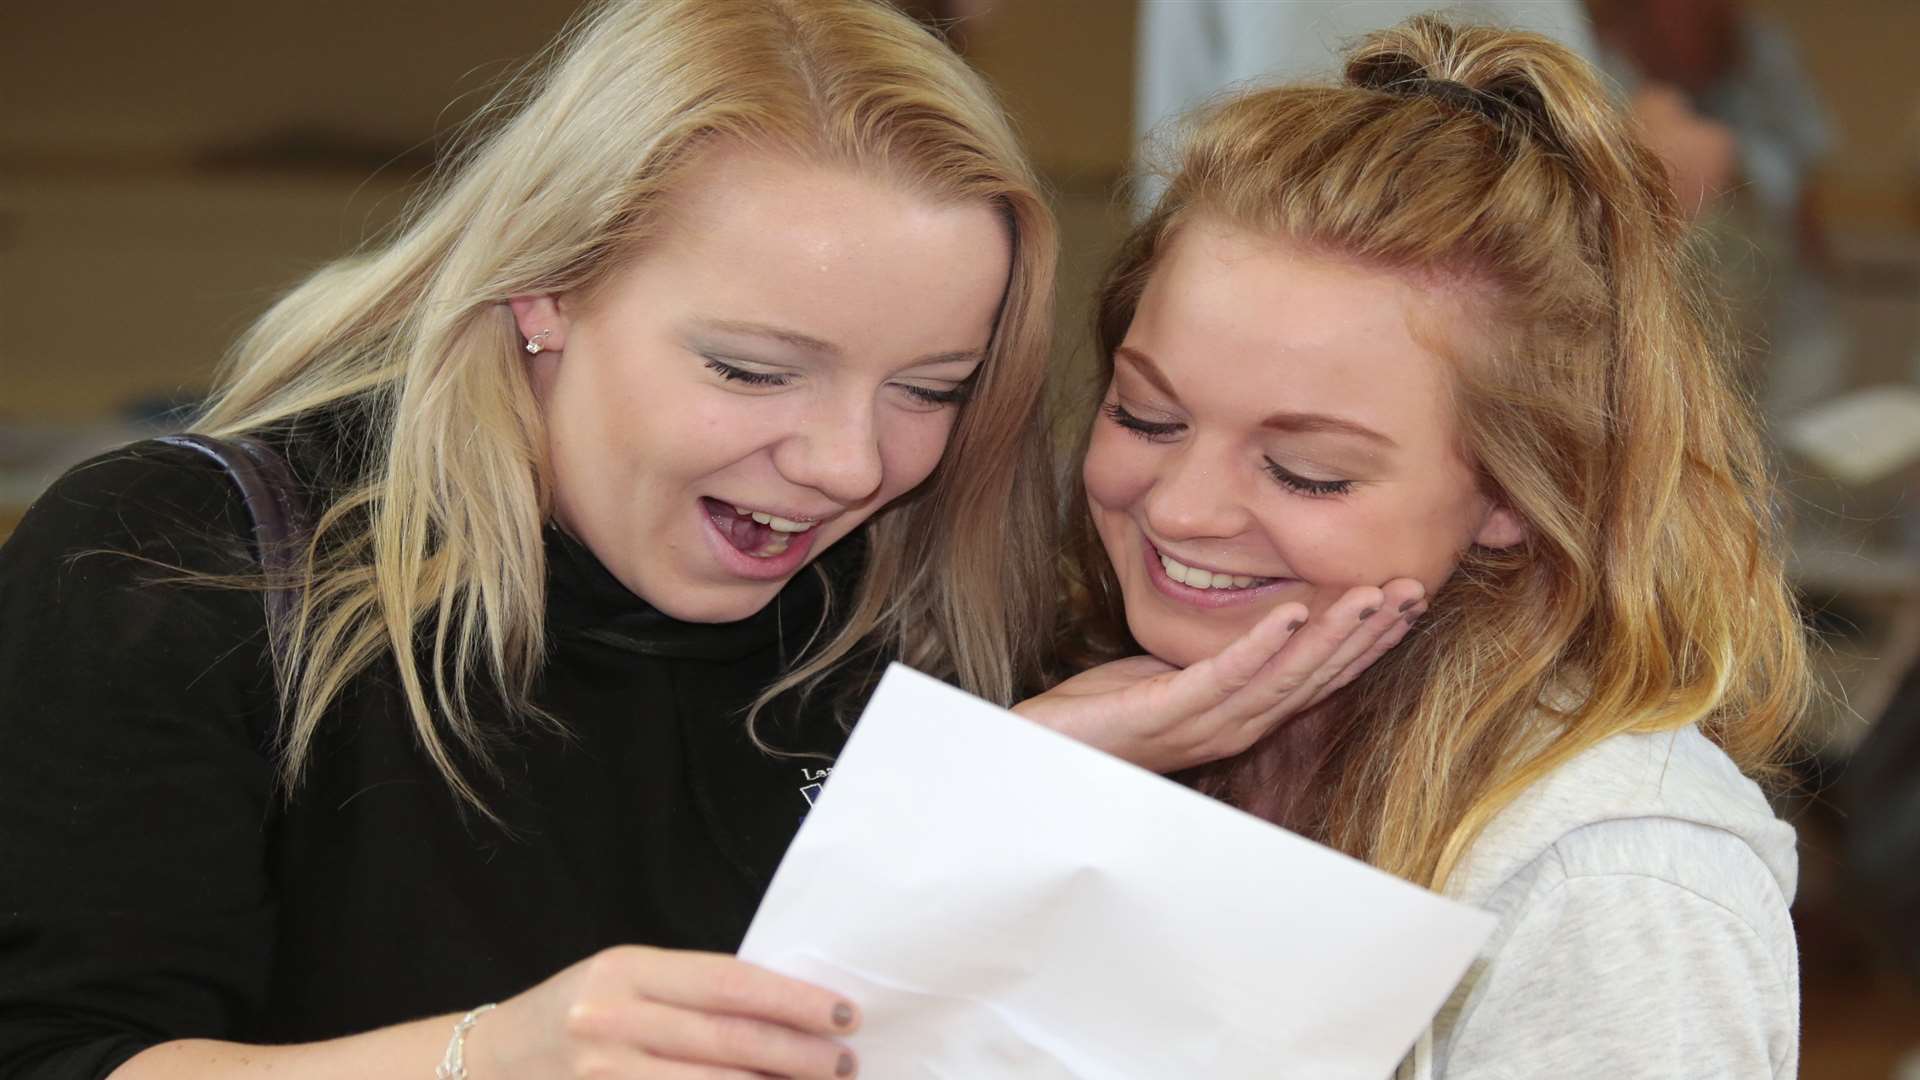 Maidstone Grammar School pupil Gina Cook is happy for her friend Louise Richardson who got into Southampton Uni